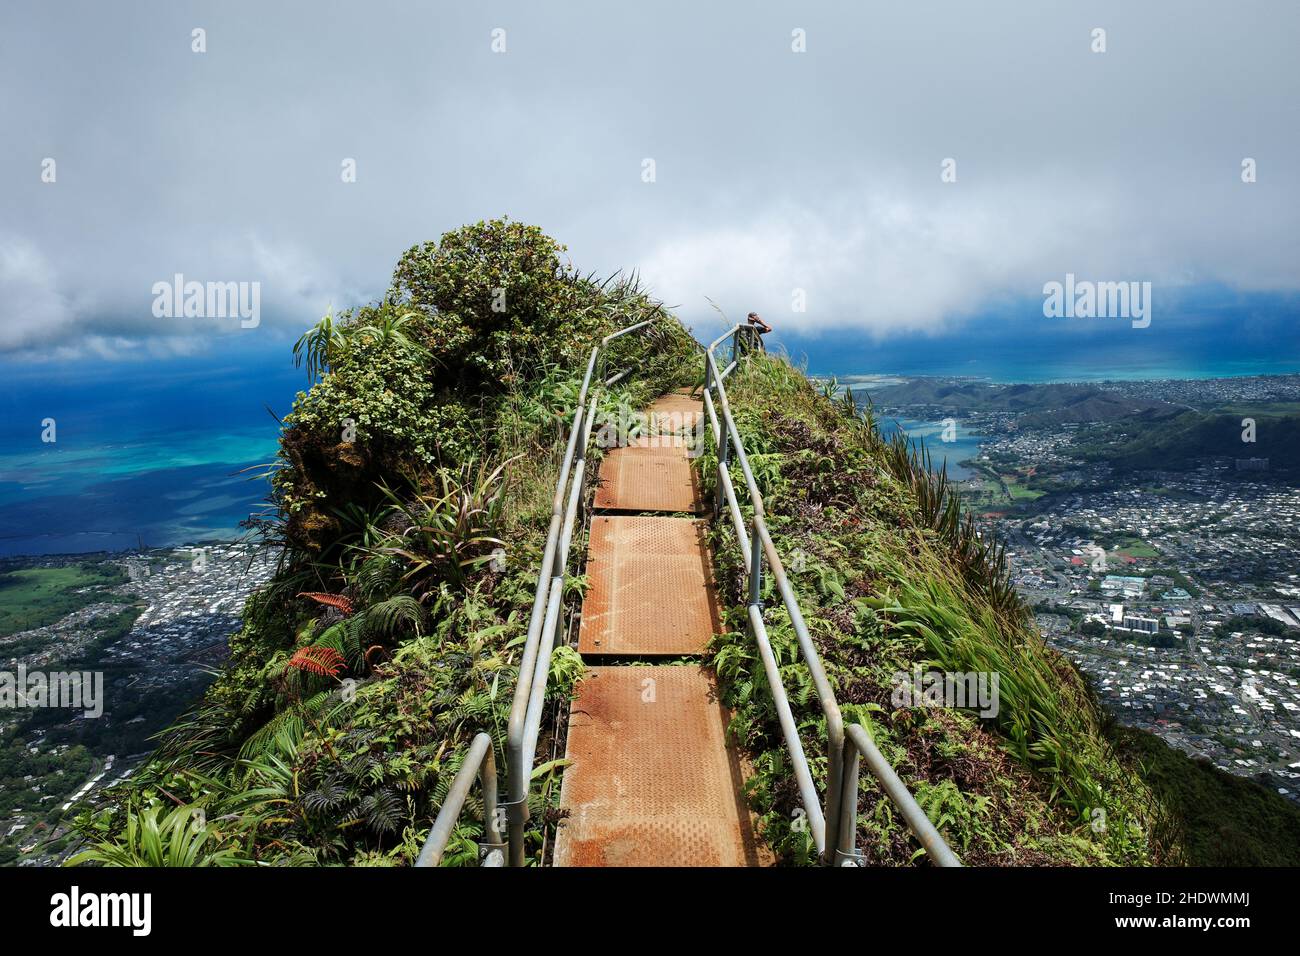 Stairway To Heaven Images – Browse 1,970 Stock Photos, Vectors